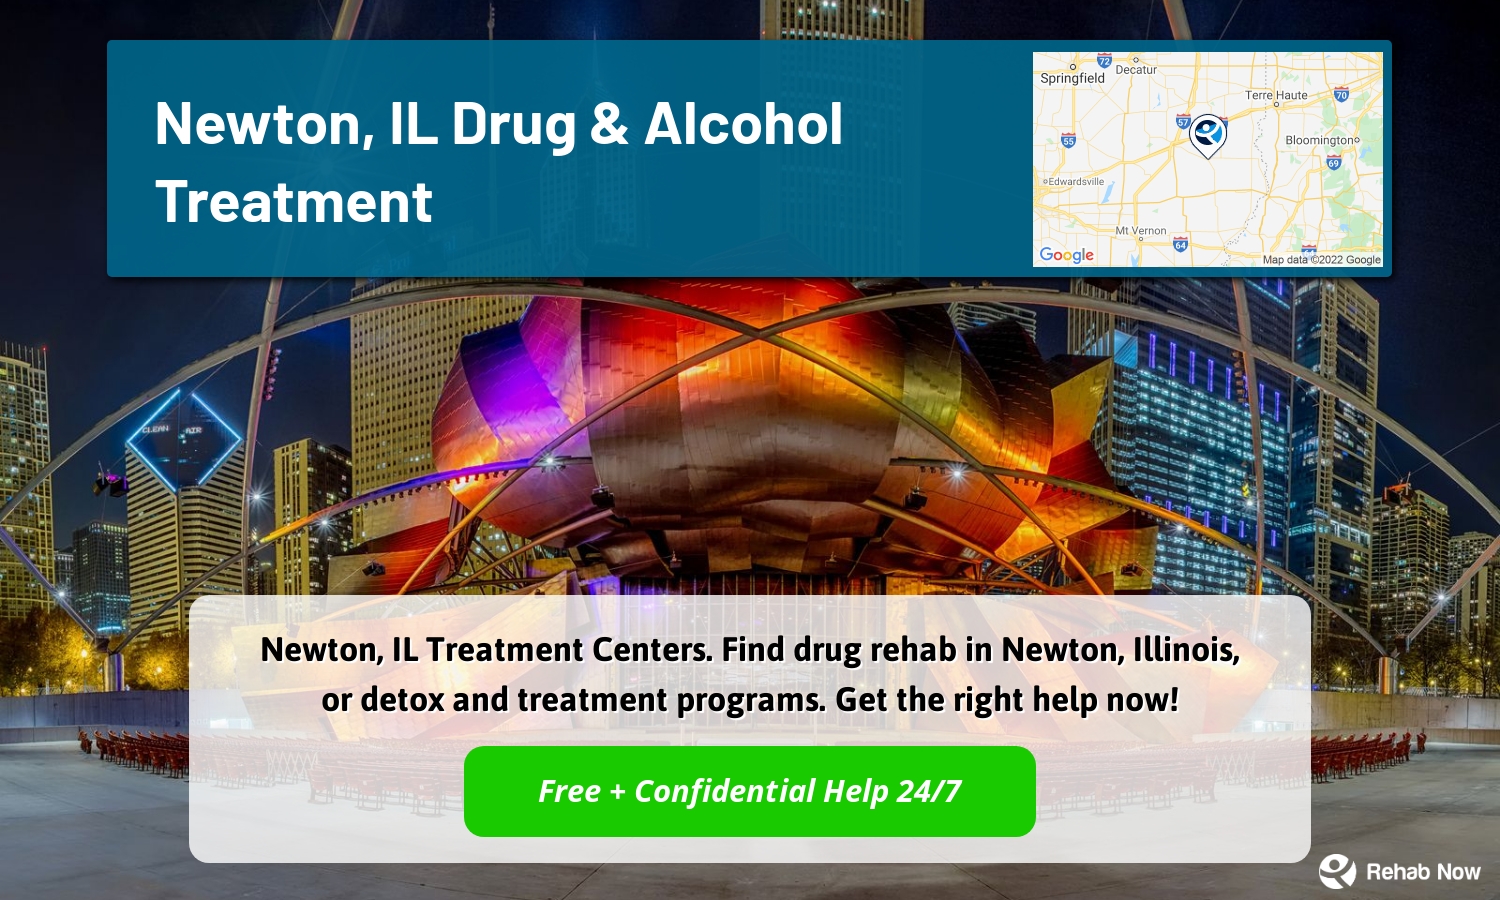 Newton, IL Treatment Centers. Find drug rehab in Newton, Illinois, or detox and treatment programs. Get the right help now!